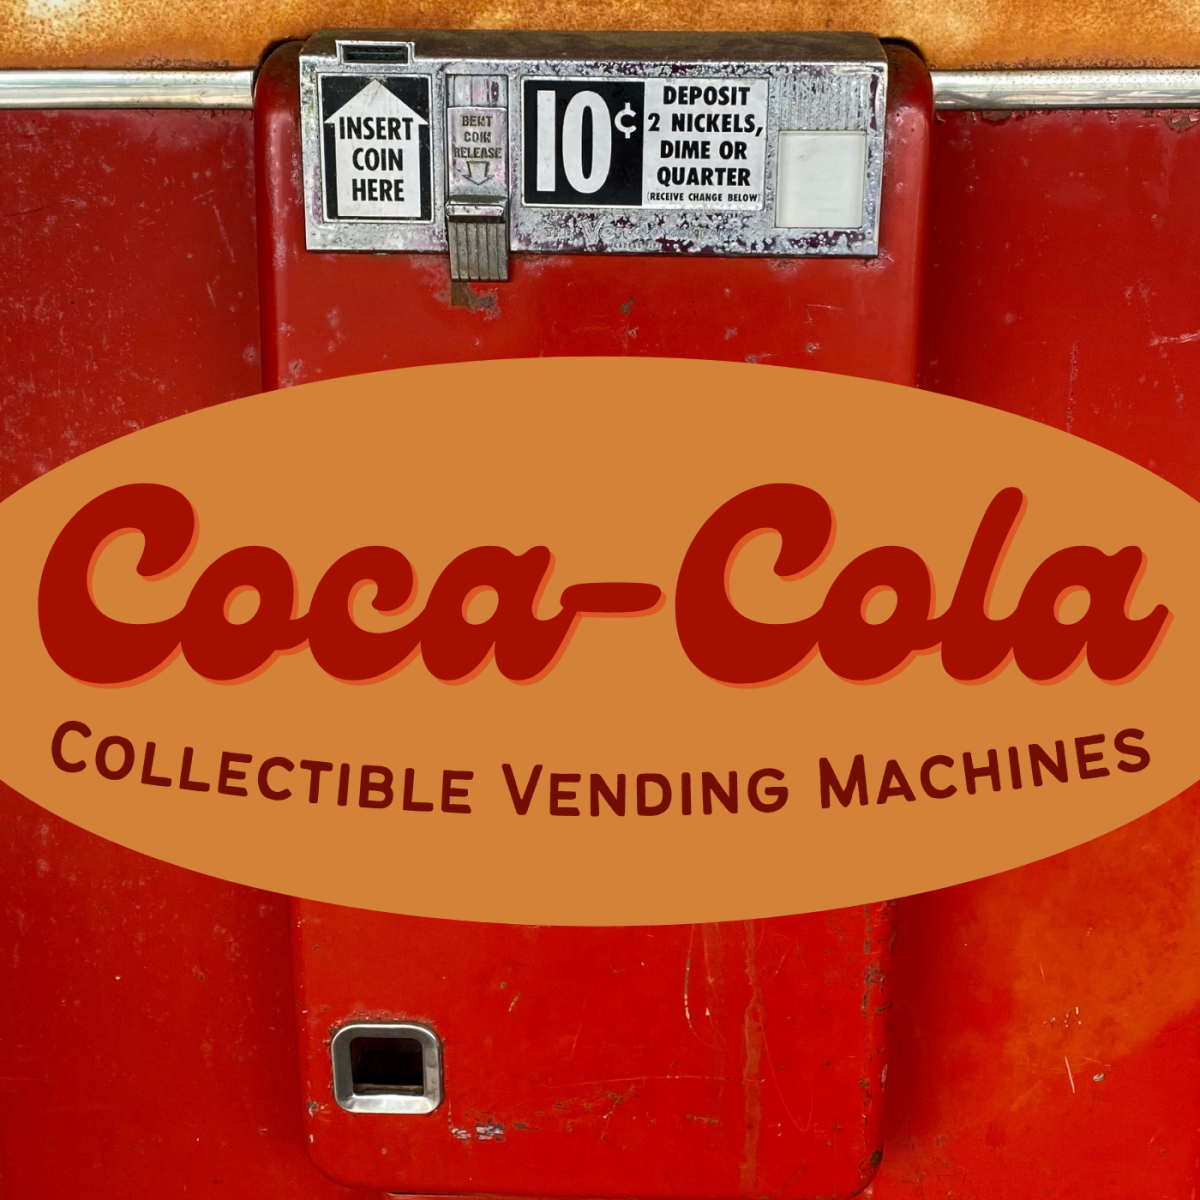 Vintage Coca-Cola Machines: Guide to Buying Old Coke Coolers